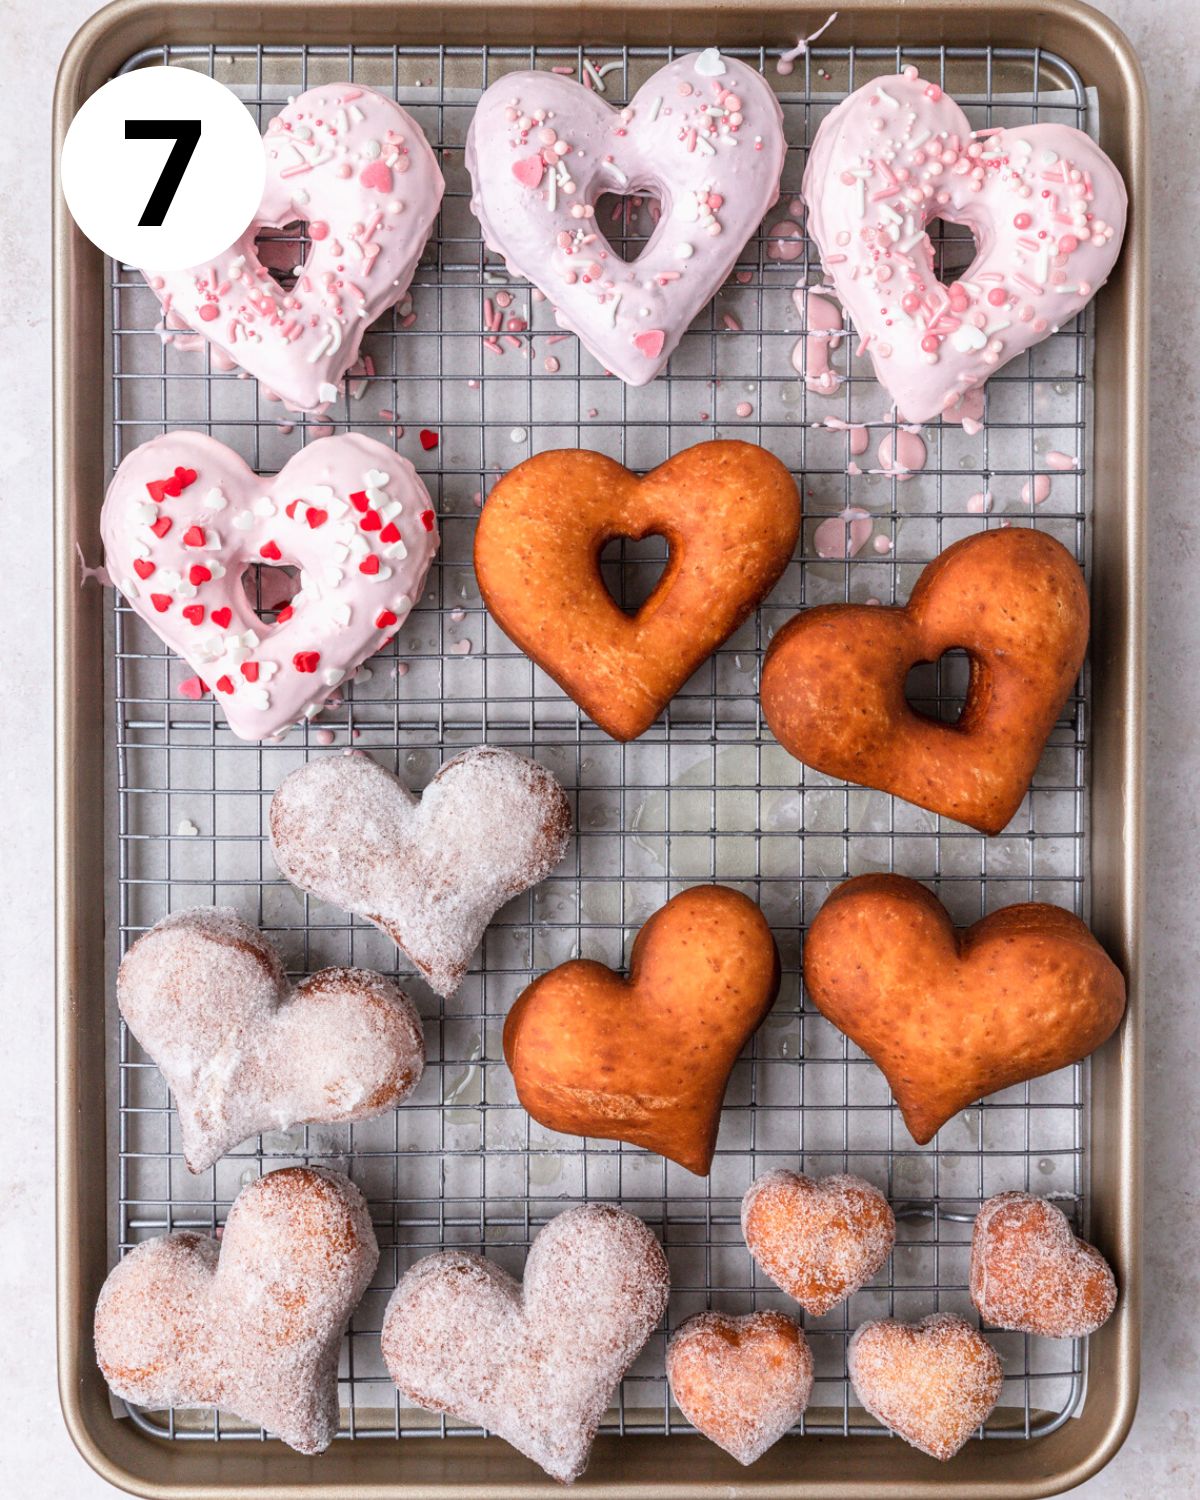 fried heart shaped donuts before glazing and rolling in sugar.